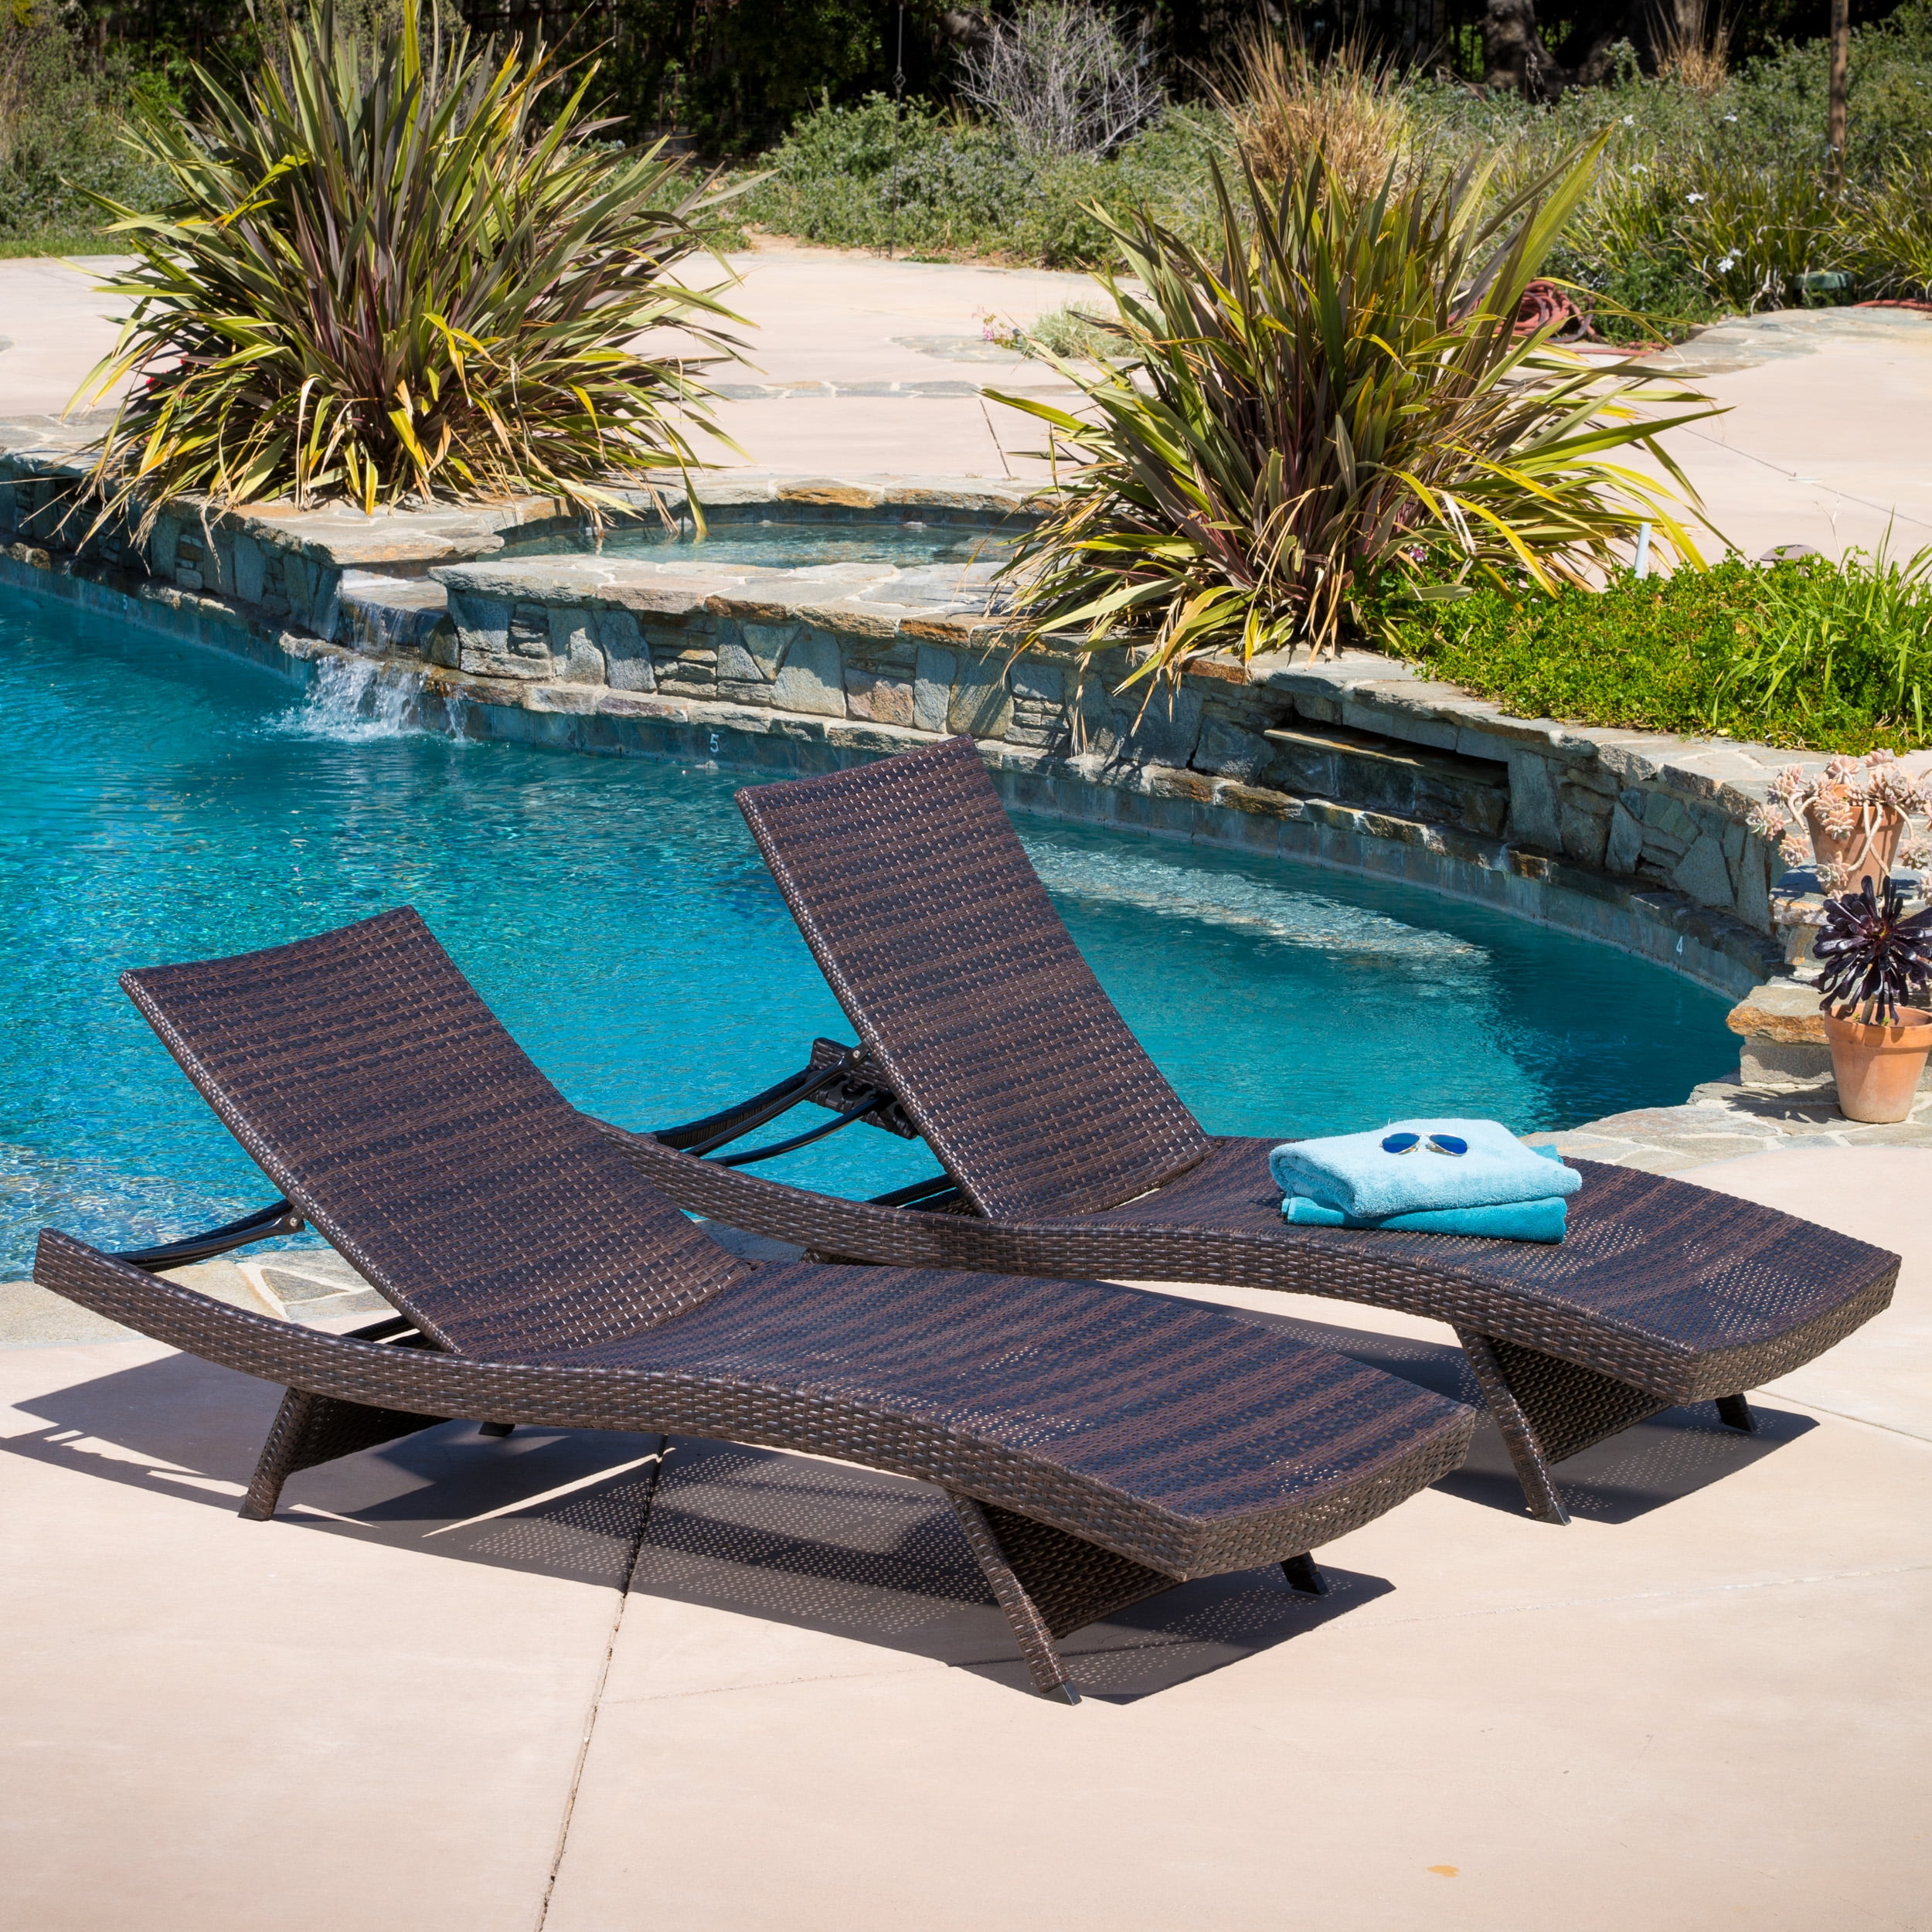 Hamlin Outdoor Brown Wicker Chaise, Pool Chaise Lounge Chairs Set Of 2